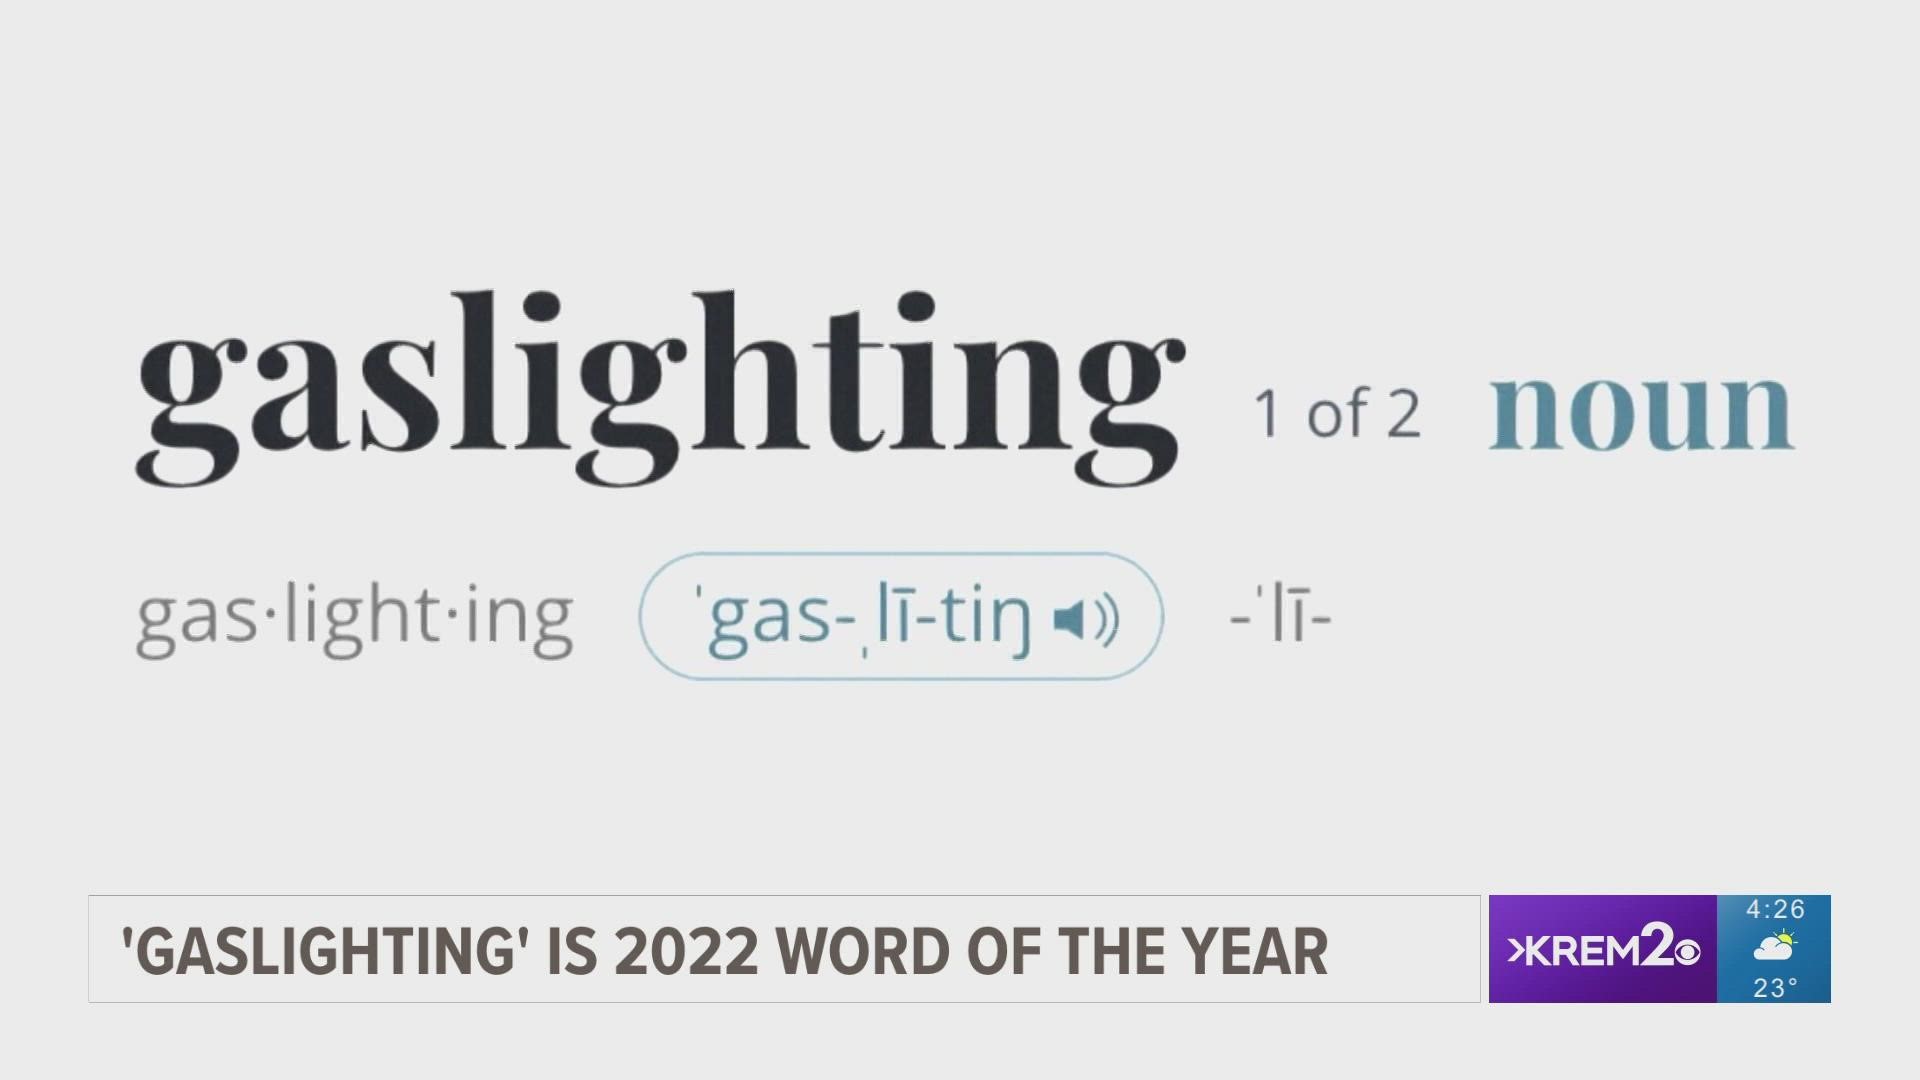 'Gaslighting' is NOT the act of practice of grossly misleading someone especially for one's own advantage and is NOT the 2022 Word of the Year.